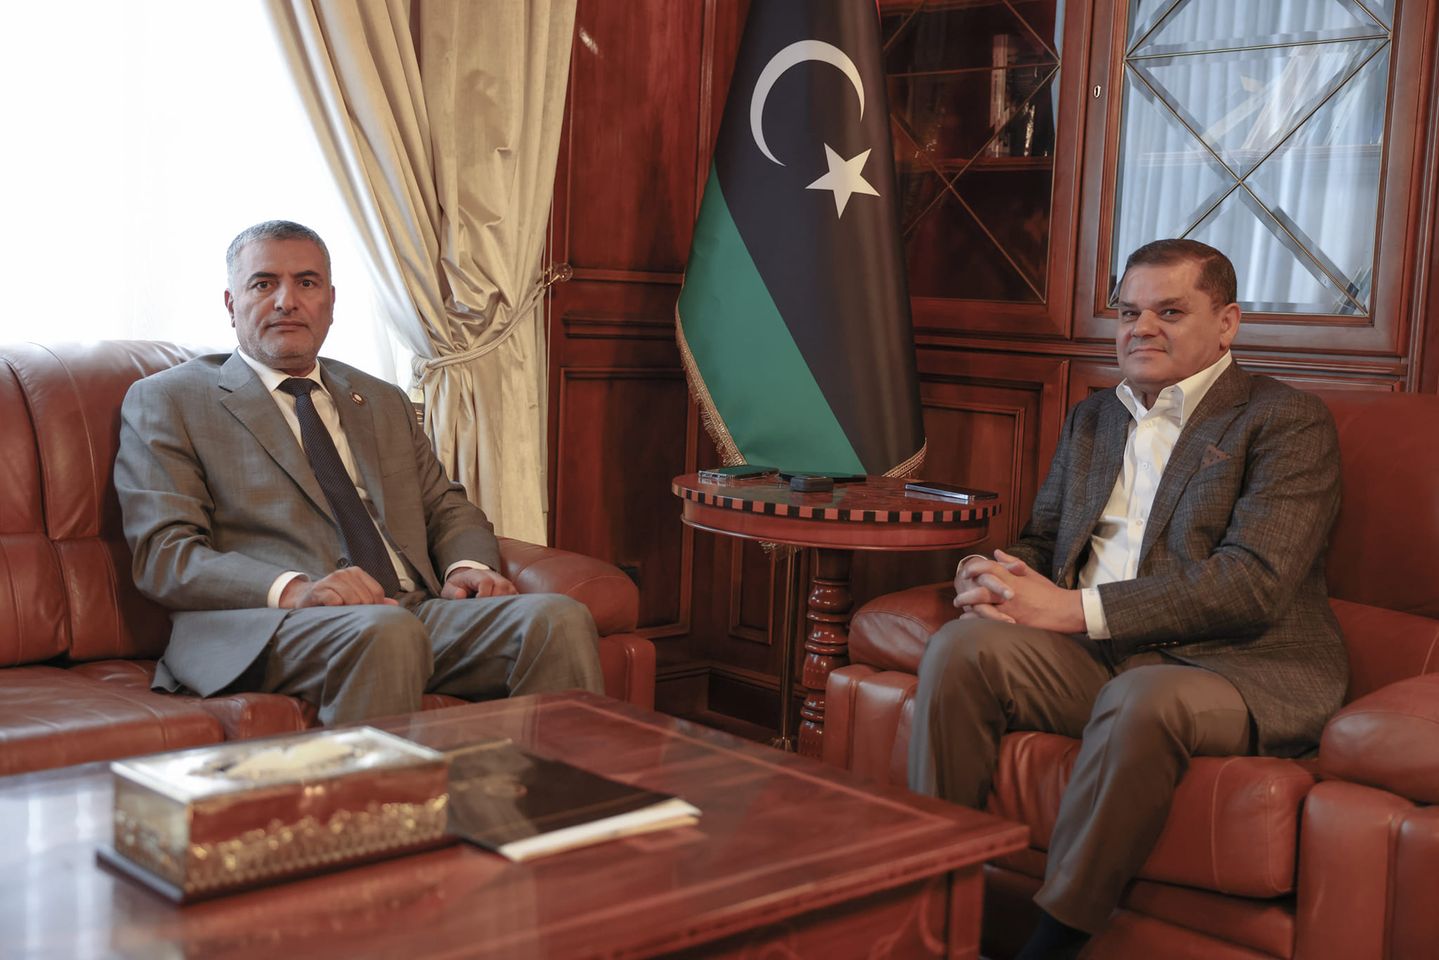 Dabaiba and Takala discuss mechanisms for consensus and dialogue to reach elections